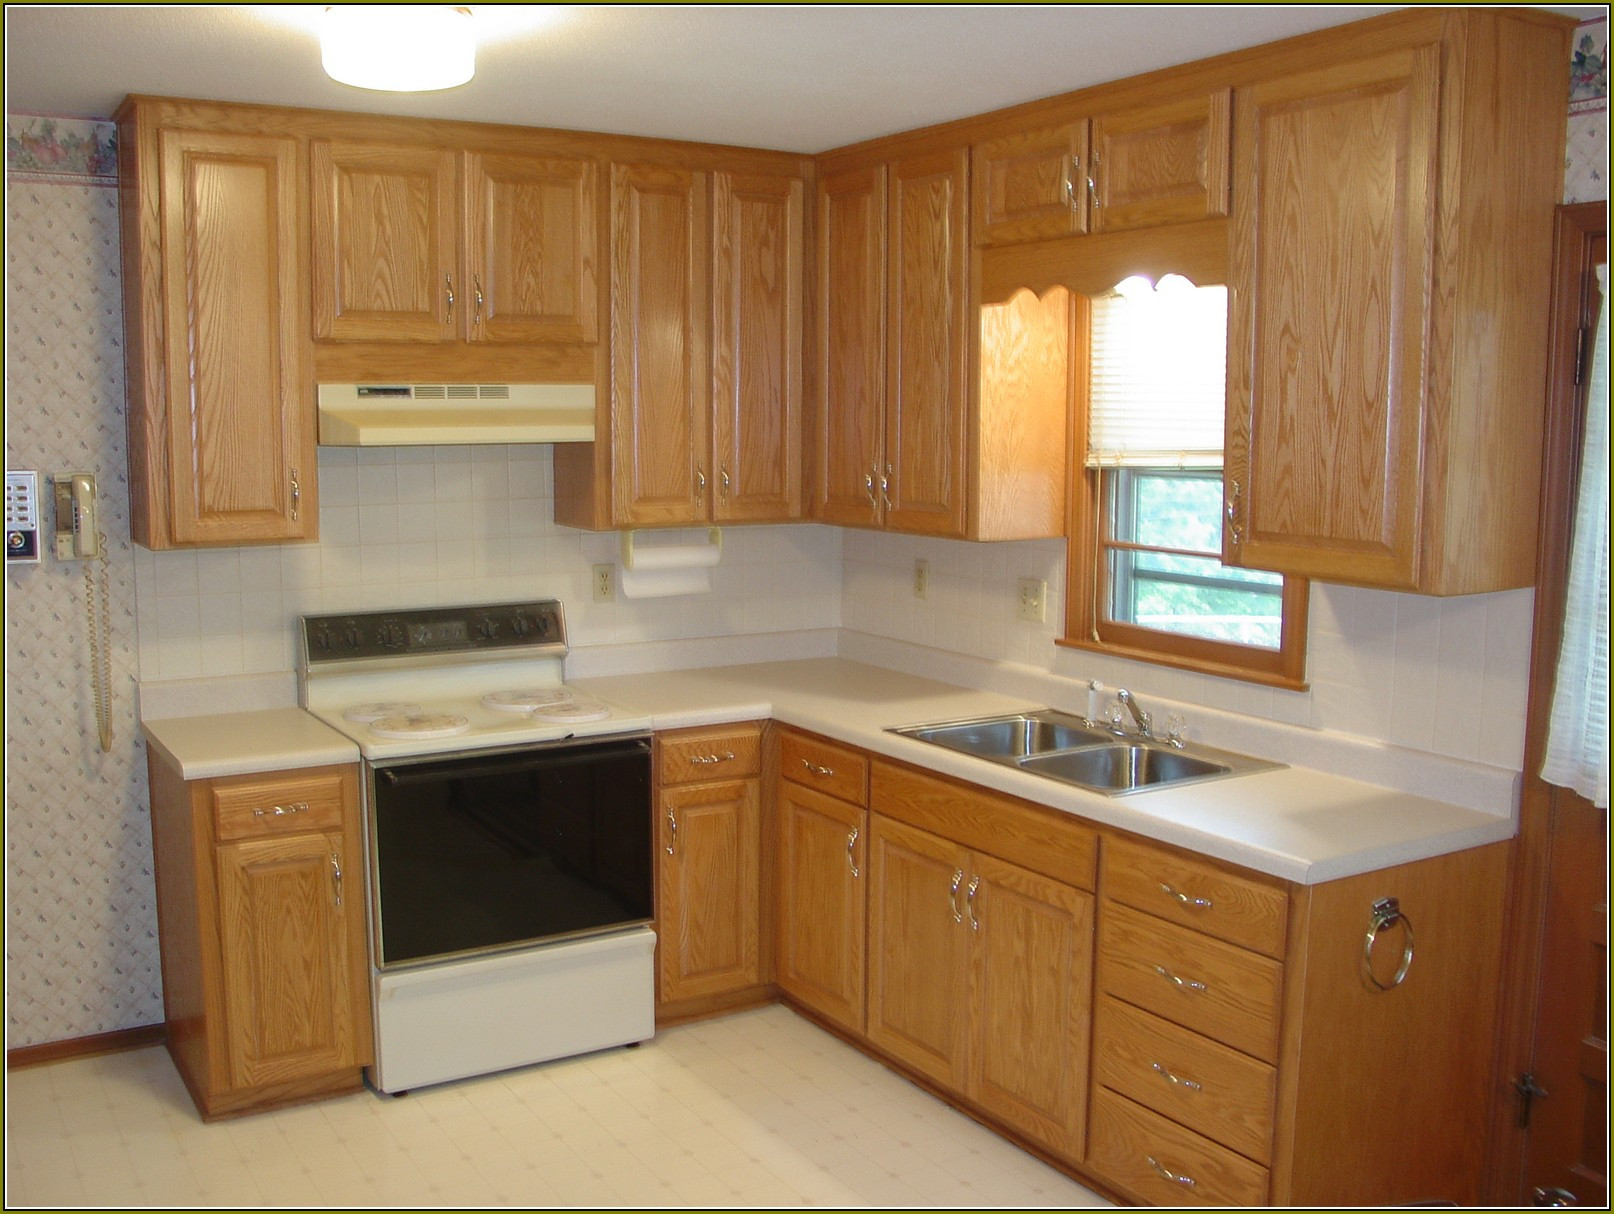 Lowes Kitchen Cabinet
 Kitchen Lowes Cabinet Doors For Your Kitchen Cabinets